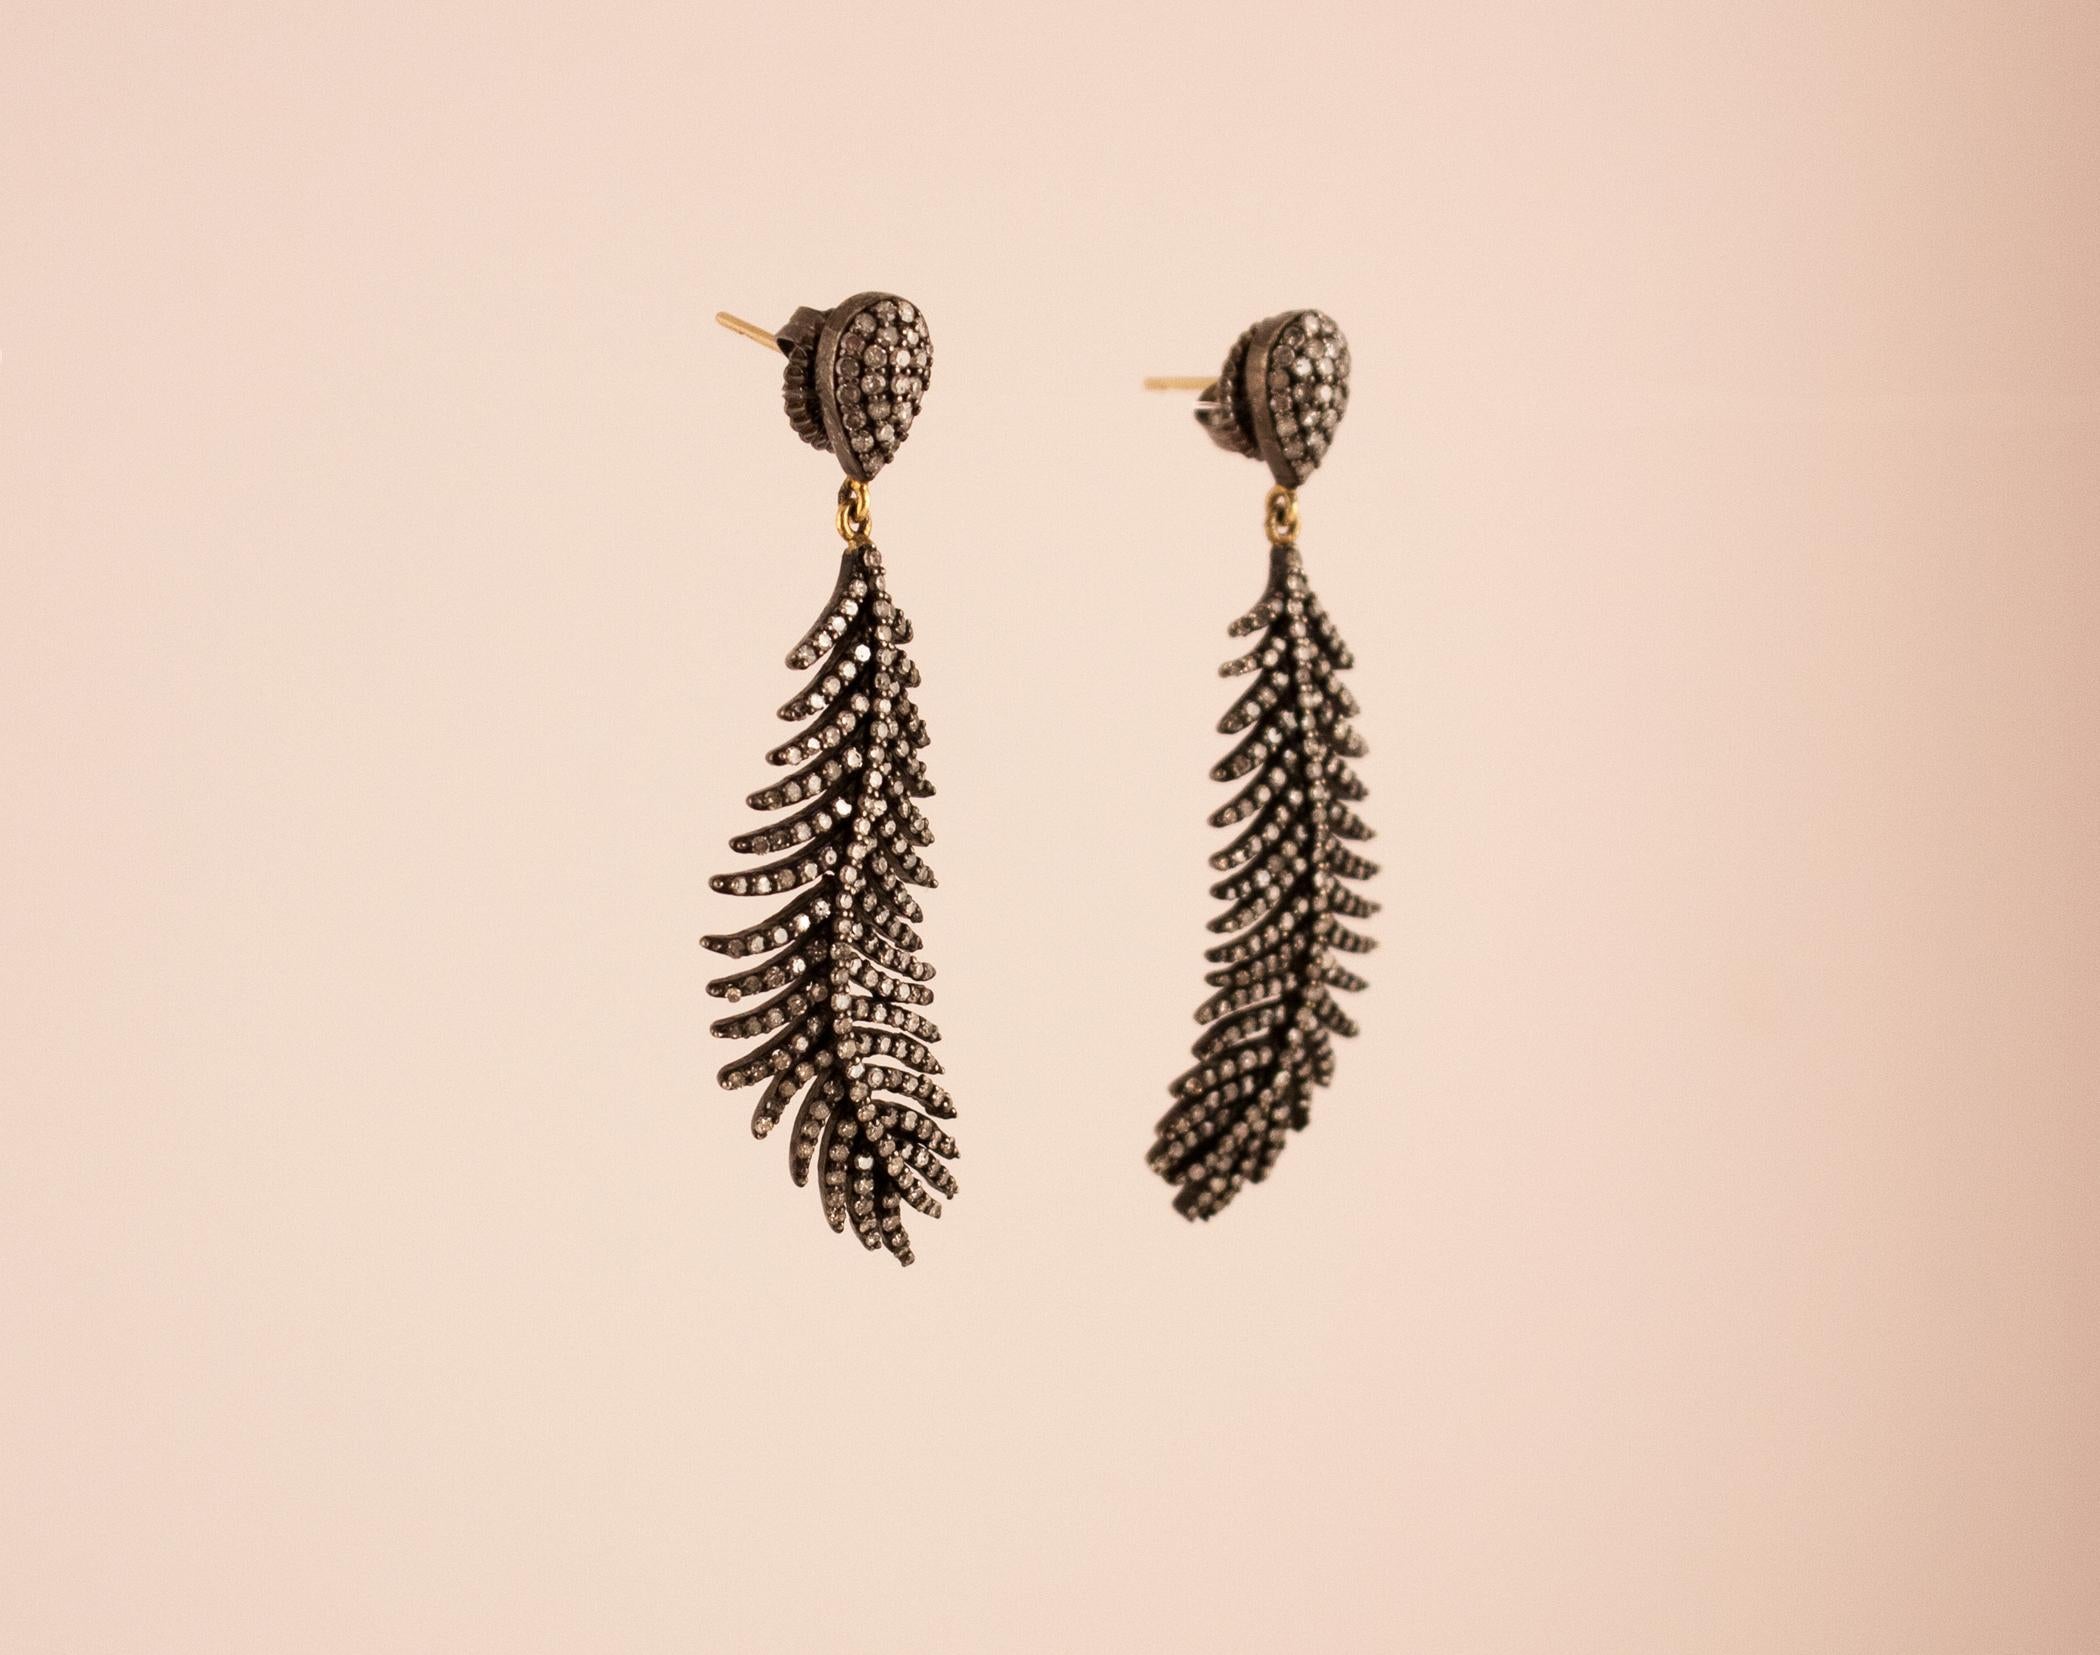 These dangling feathers, or ferns, feature diamonds set in oxidized sterling silver. The dark silver setting gives the earrings an art deco appeal.
Diamond: 3.04 ct
 